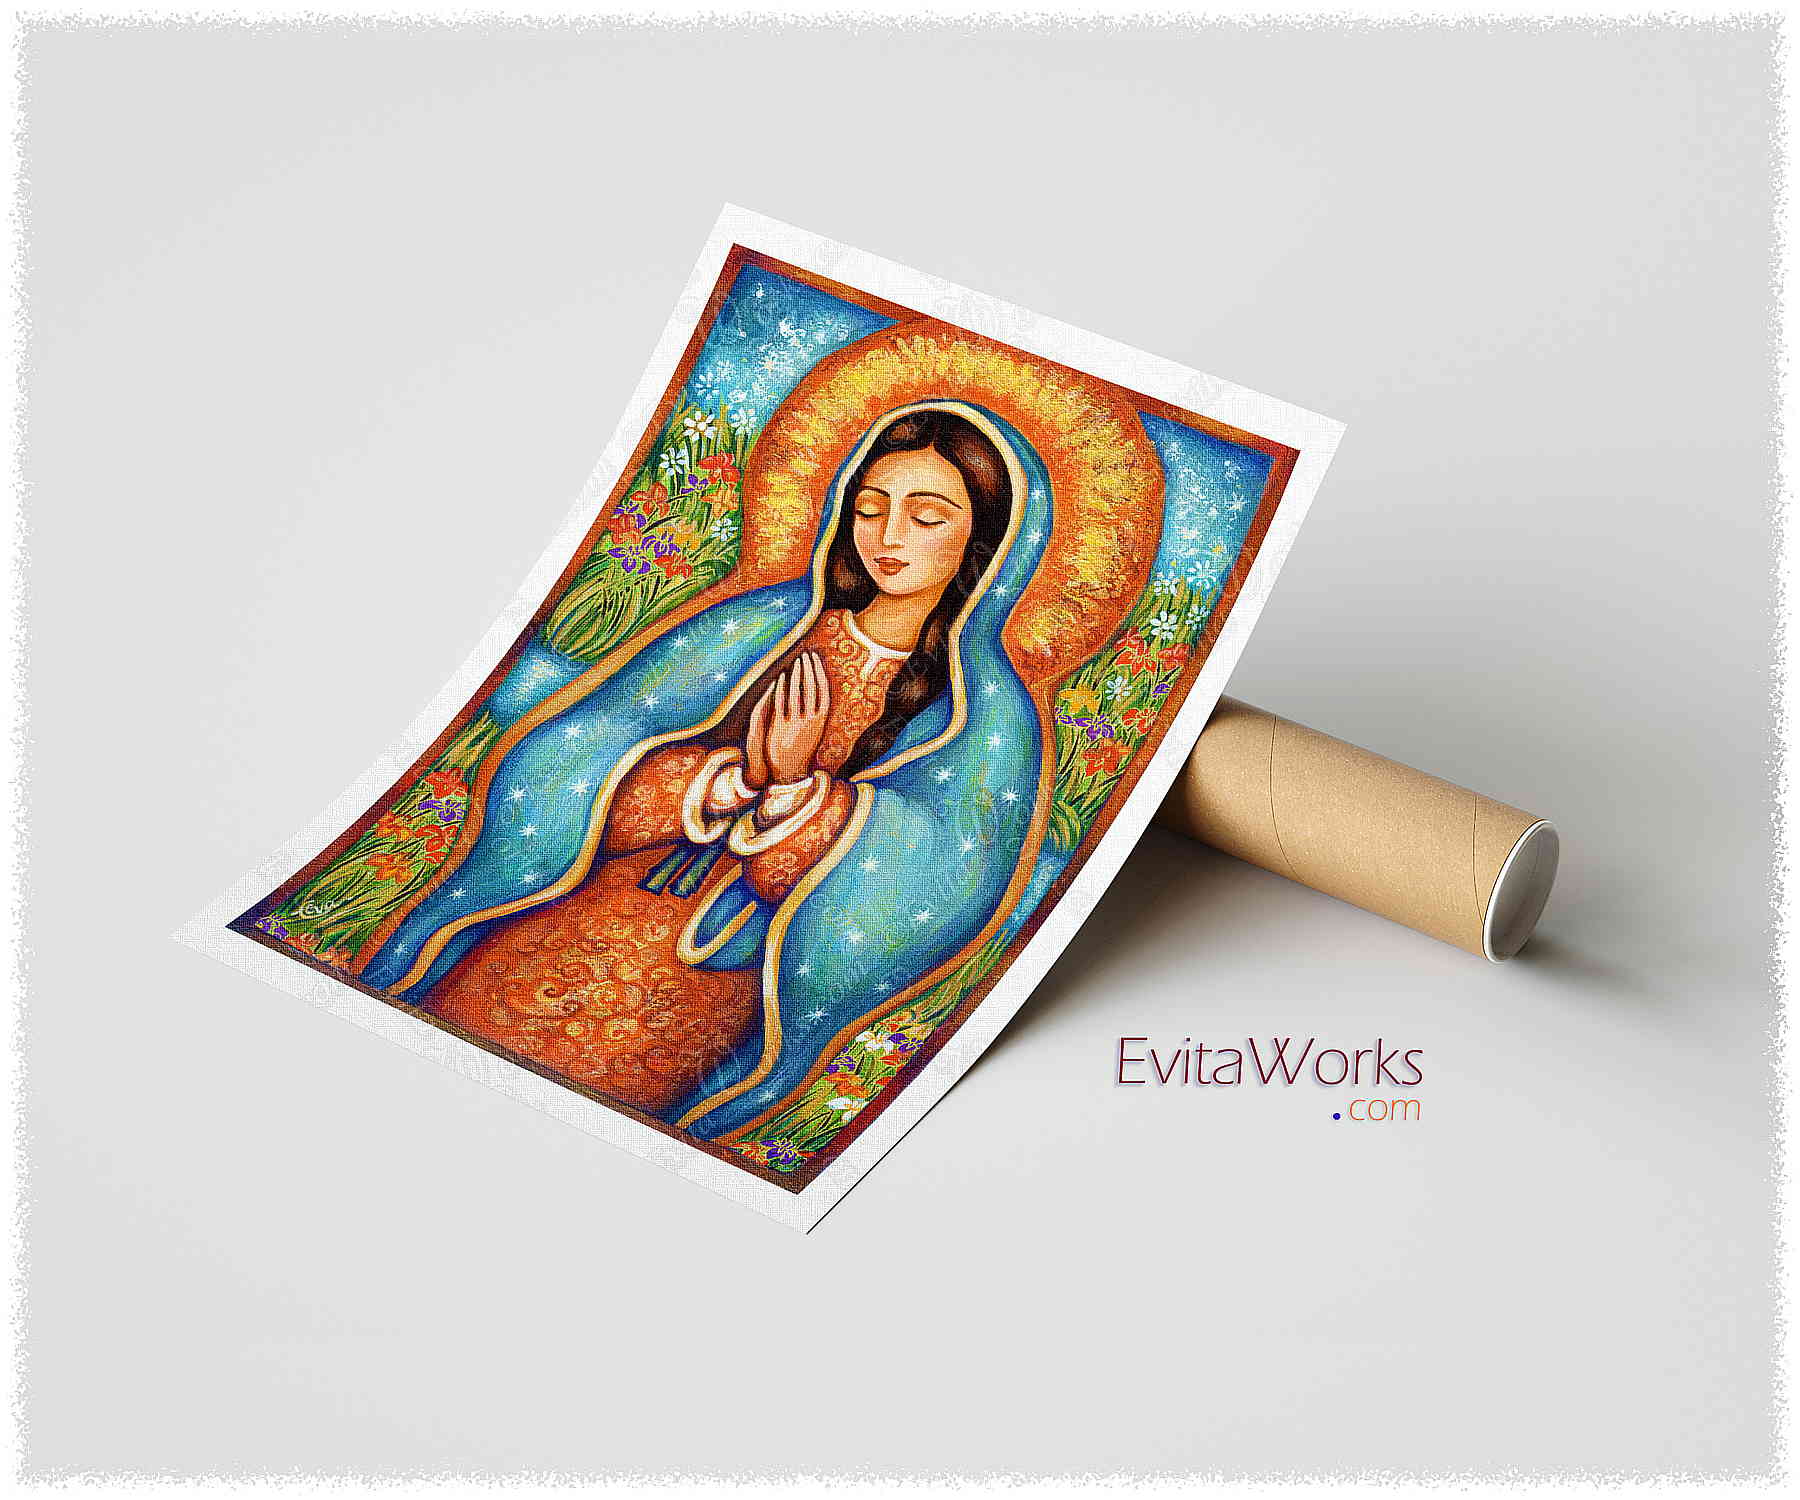 Hit to learn about "The Virgin of Guadalupe" on prints